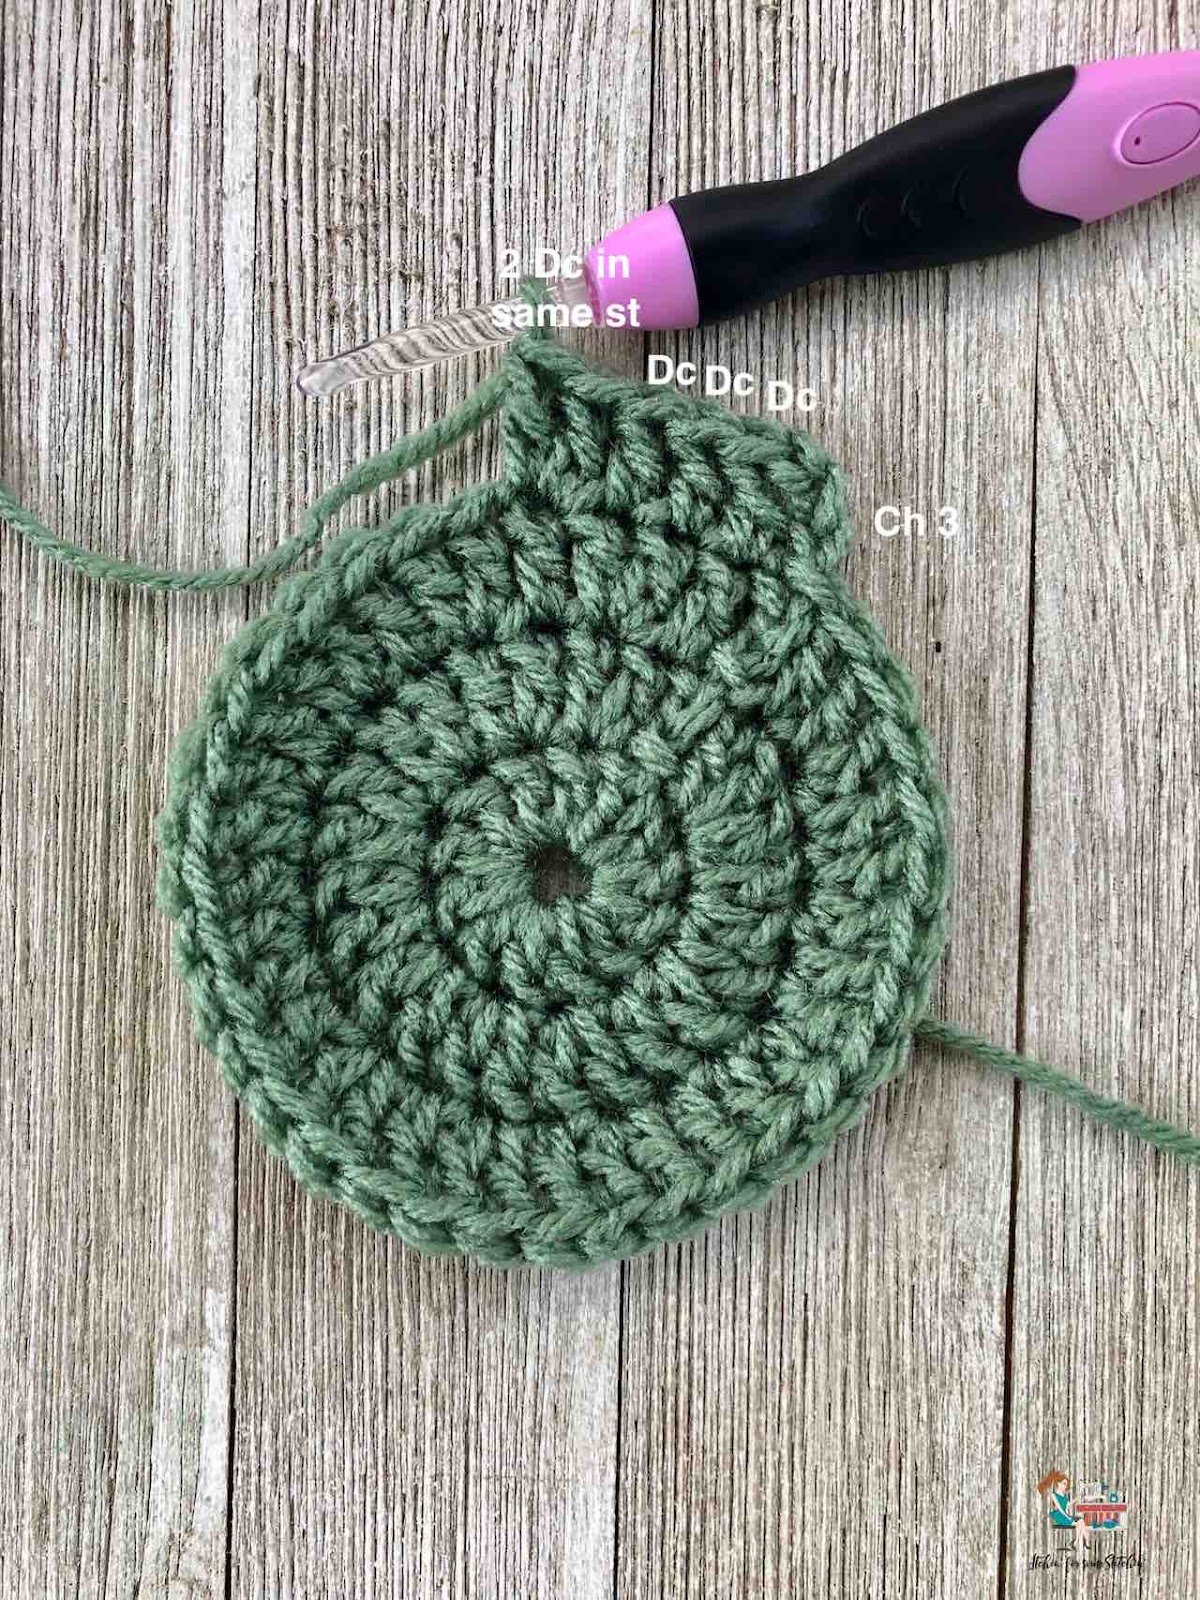 How to increase in circles using dc_round 4 by www.itchinforsomestitchin.com